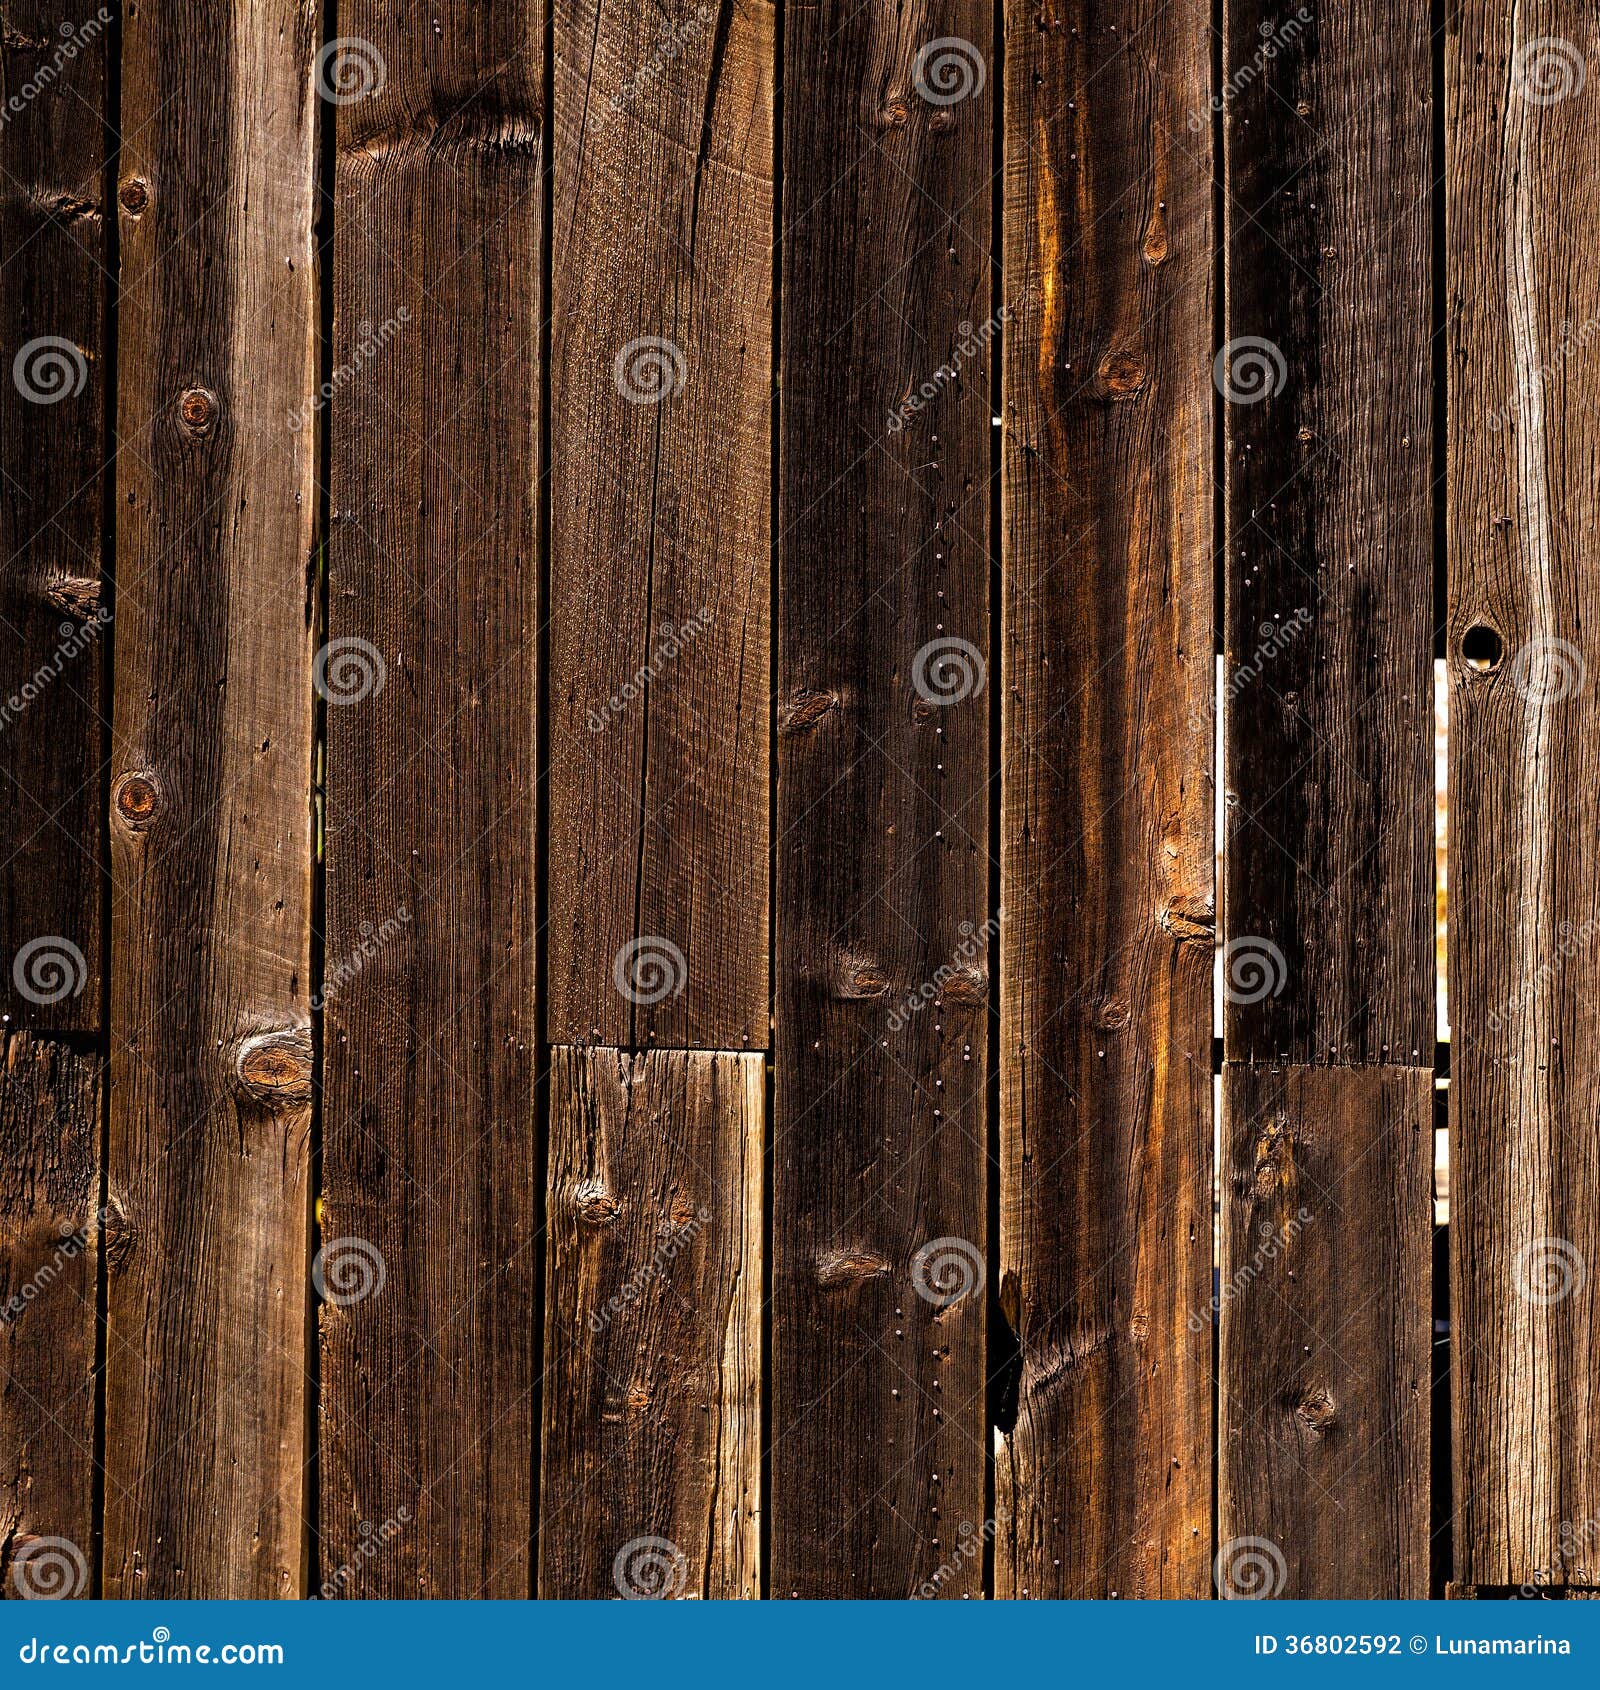 california old far west wooden textures